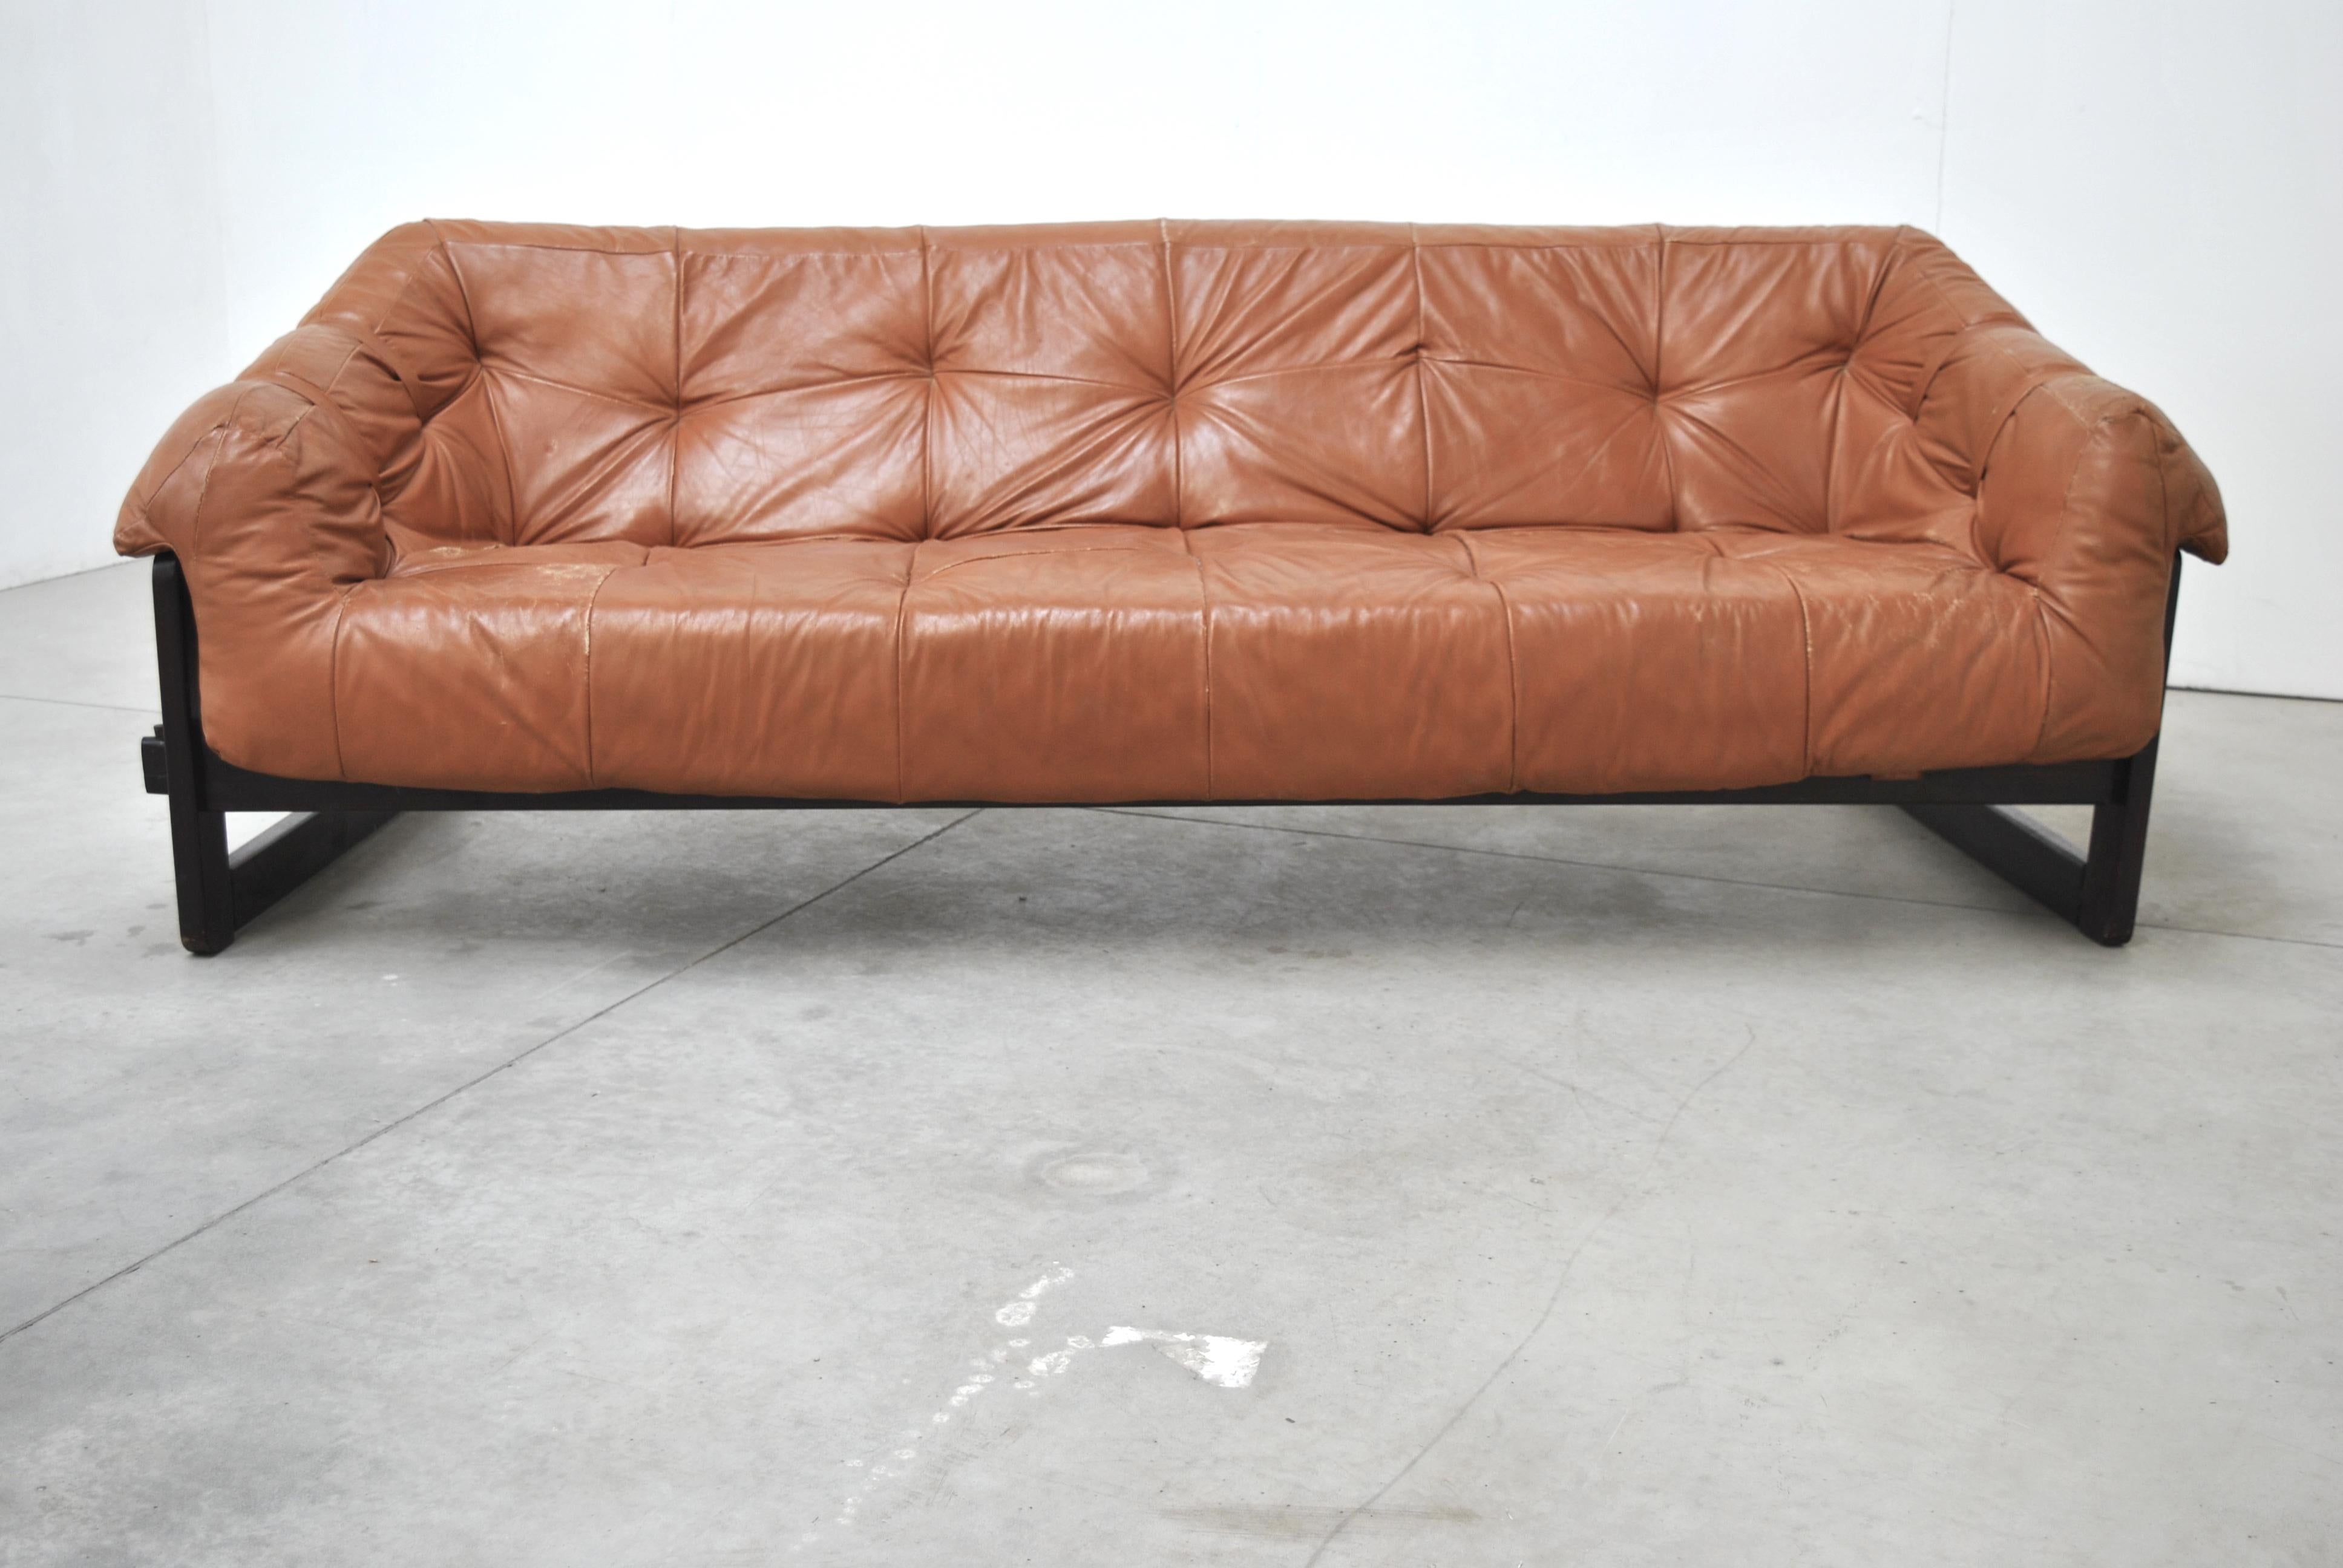  Sofa by Percival Lafer. Brazilian rosewood and original leather. Really unique design and construction make this a true statement piece.
   